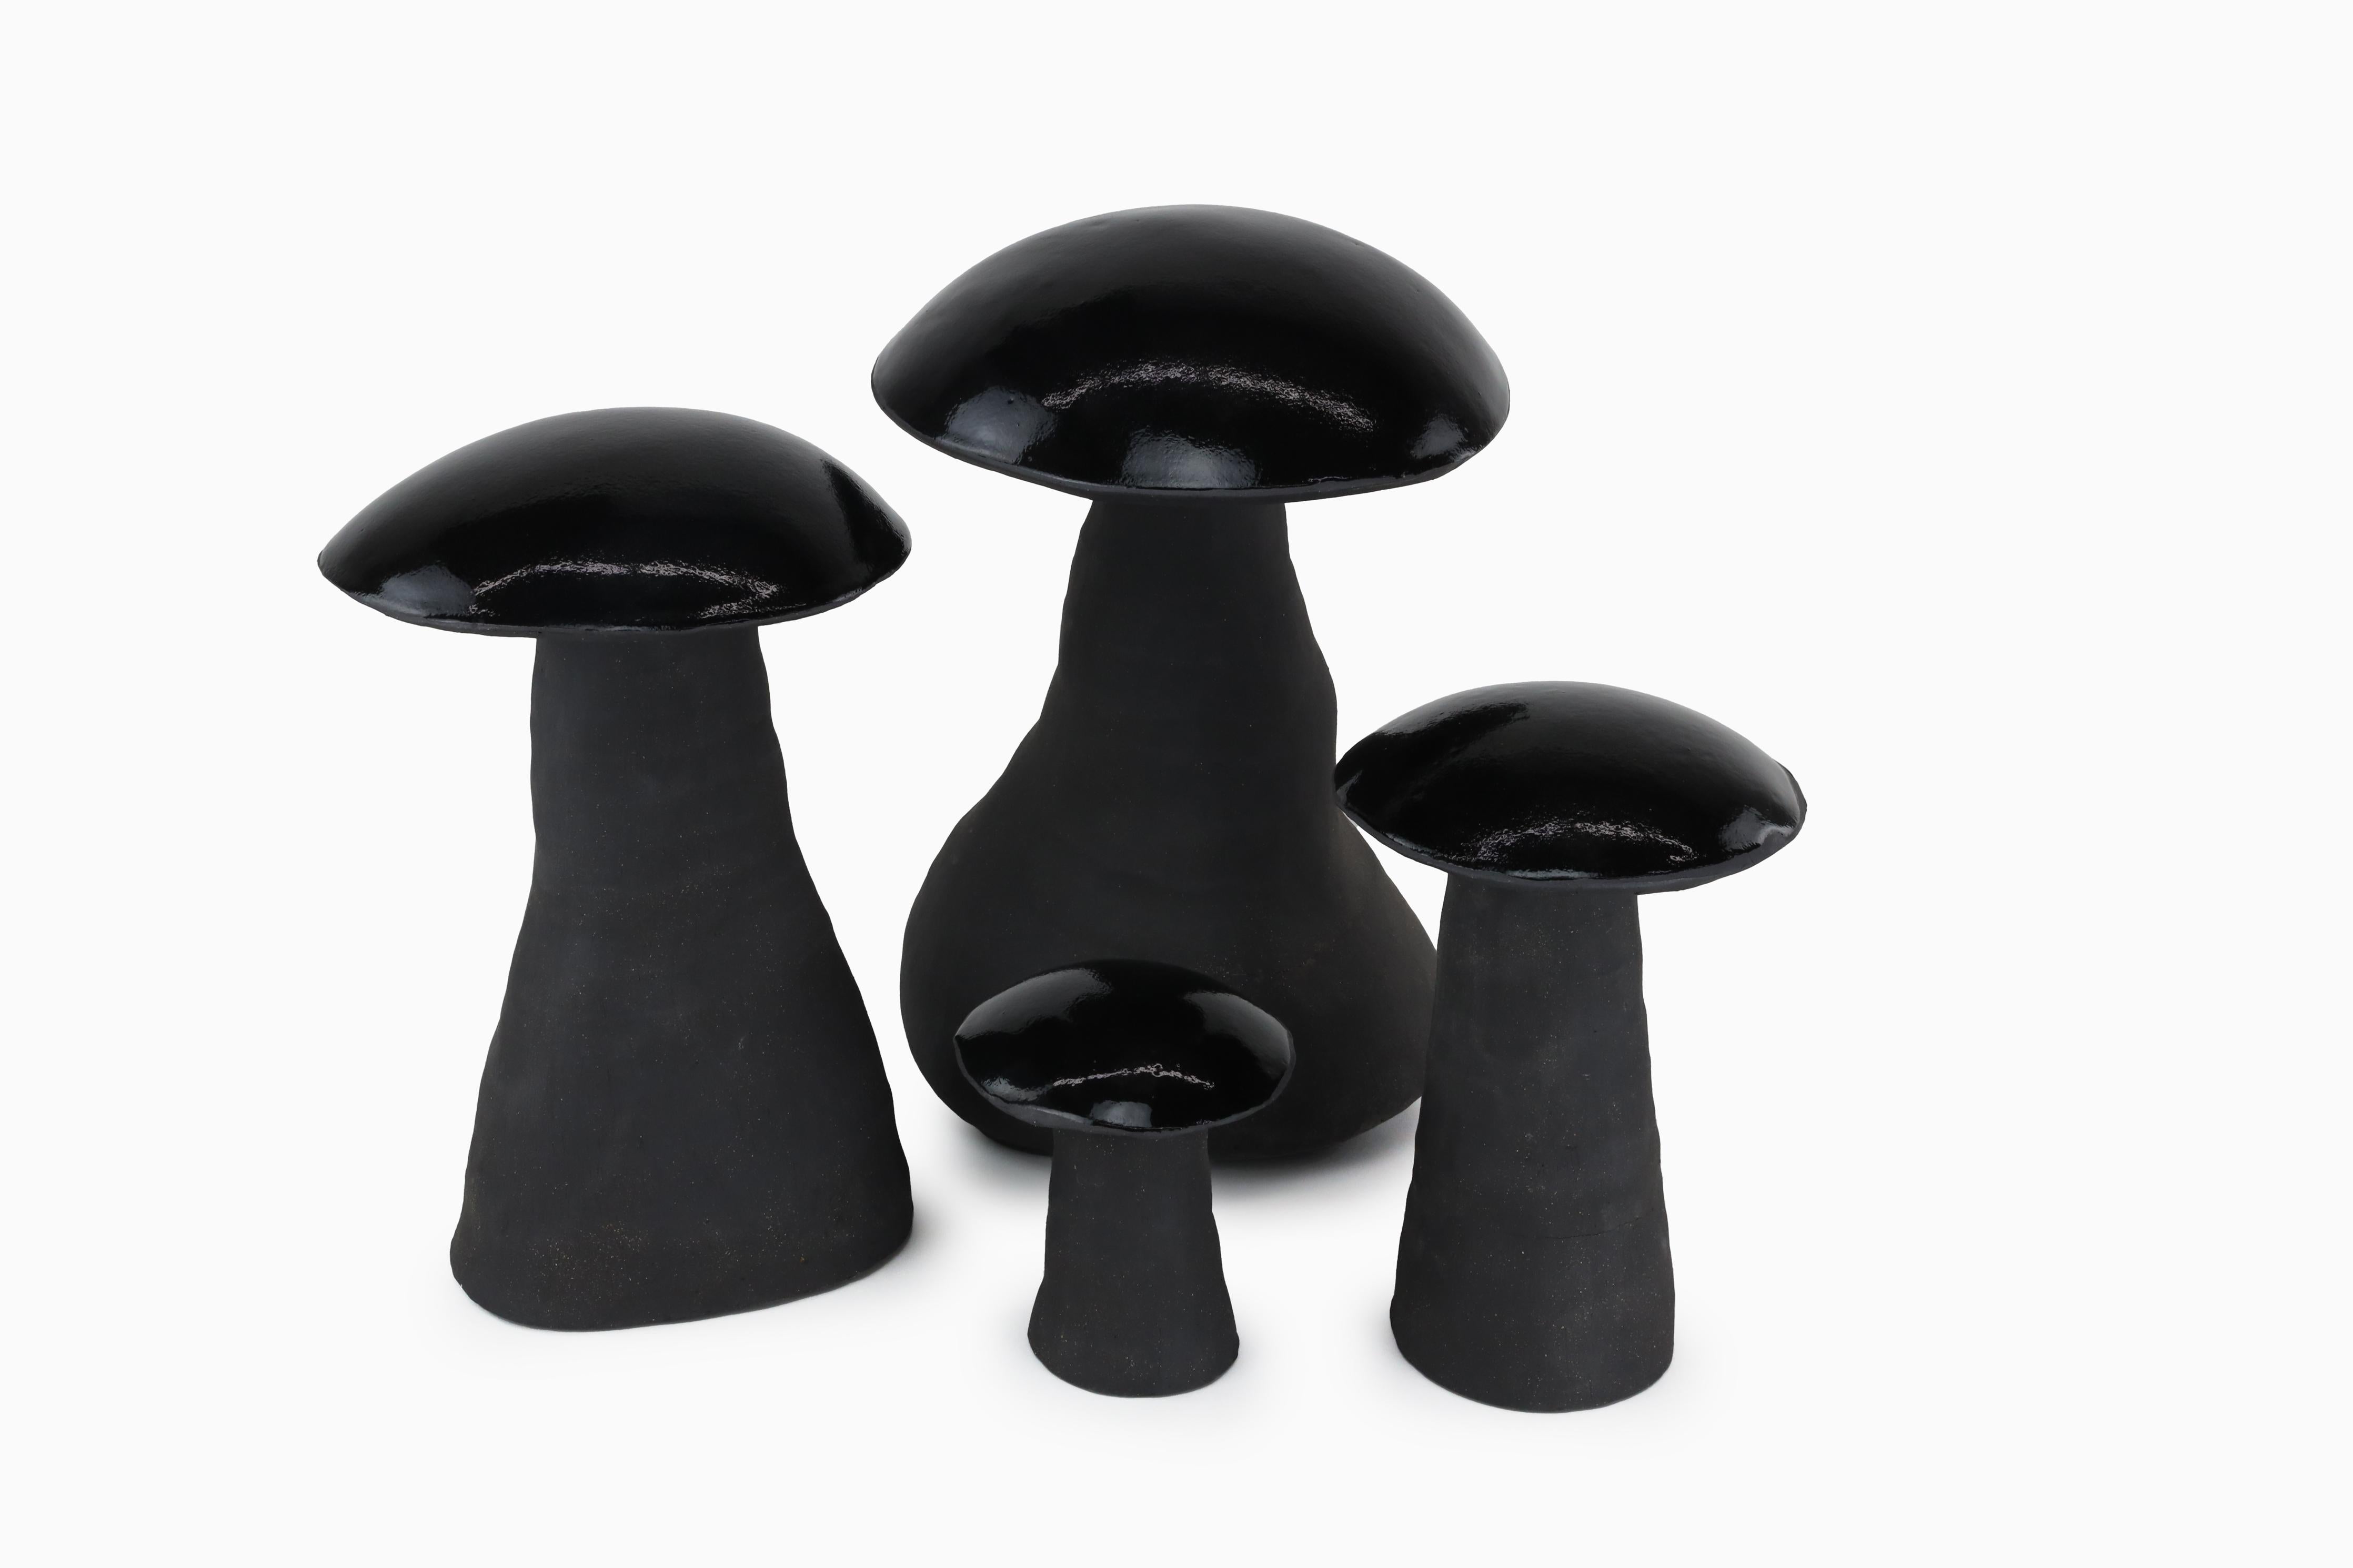 The Midnight Magic Mushrooms come as a set of four. Each mushroom is handmade and unique. You will receive a set similar to what you see pictured, but the stems will vary in size and shape because they are one of a kind. The Midnight Magic Mushrooms